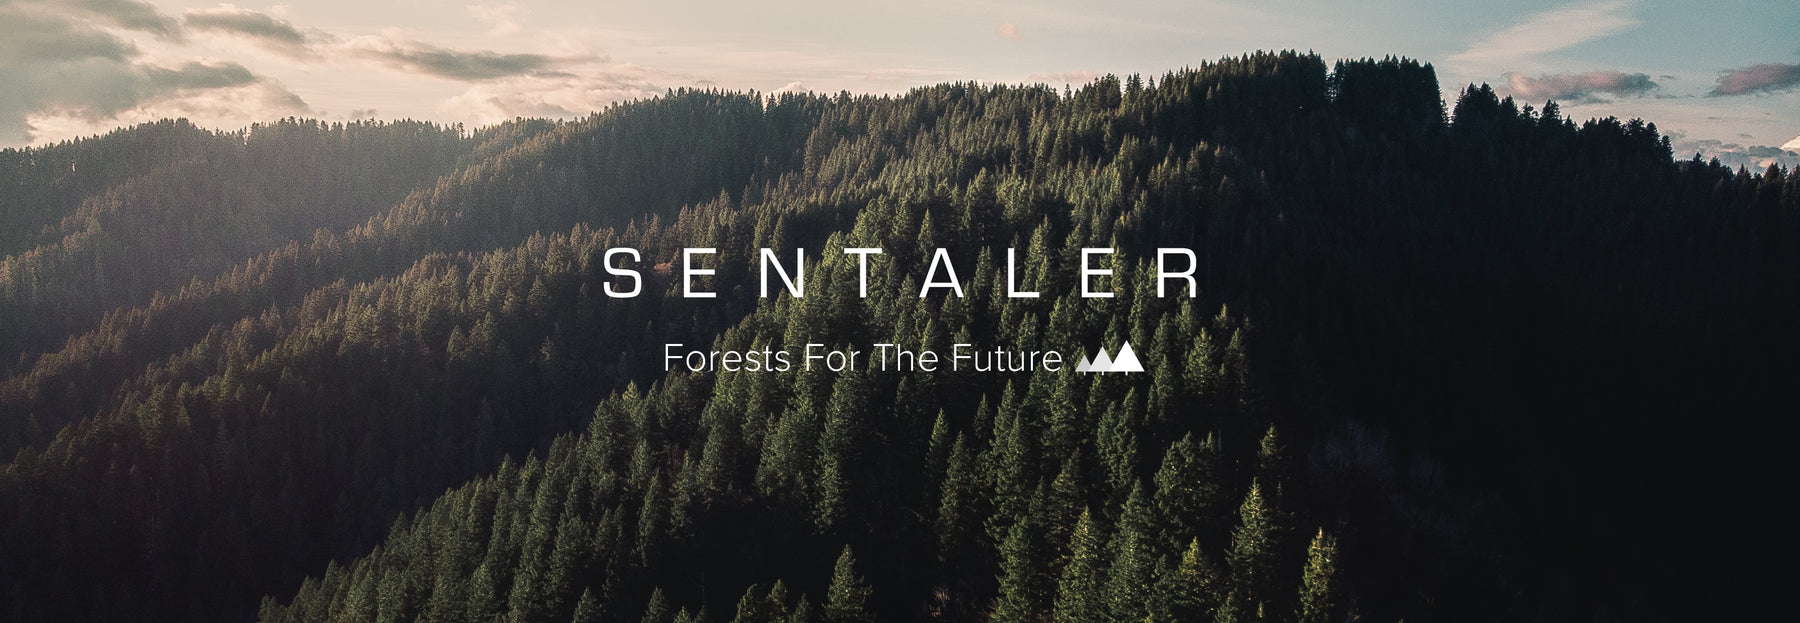 Image overlooking a mountain full of green trees with the SENTALER Forests for the Future logo over top.